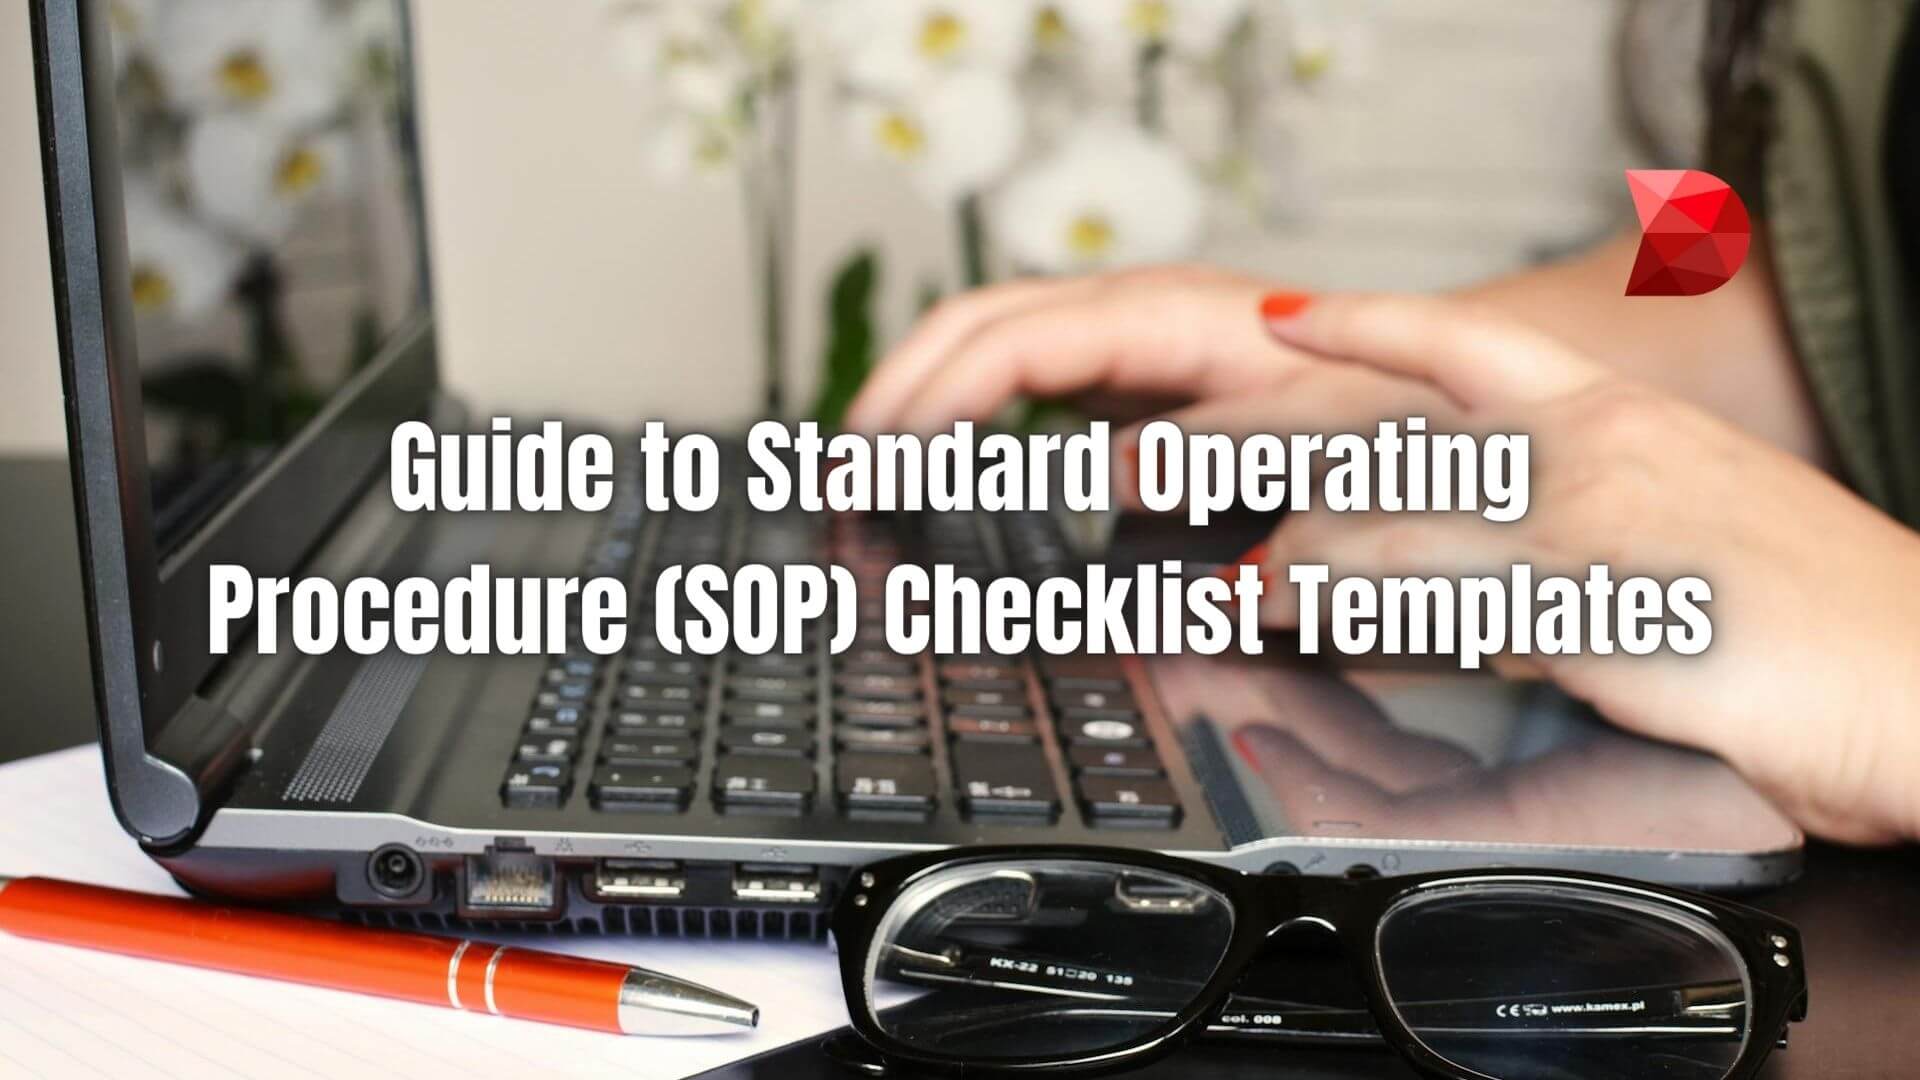 Unlock efficiency with our guide! Learn to craft standard operating procedure checklist templates for seamless operations.